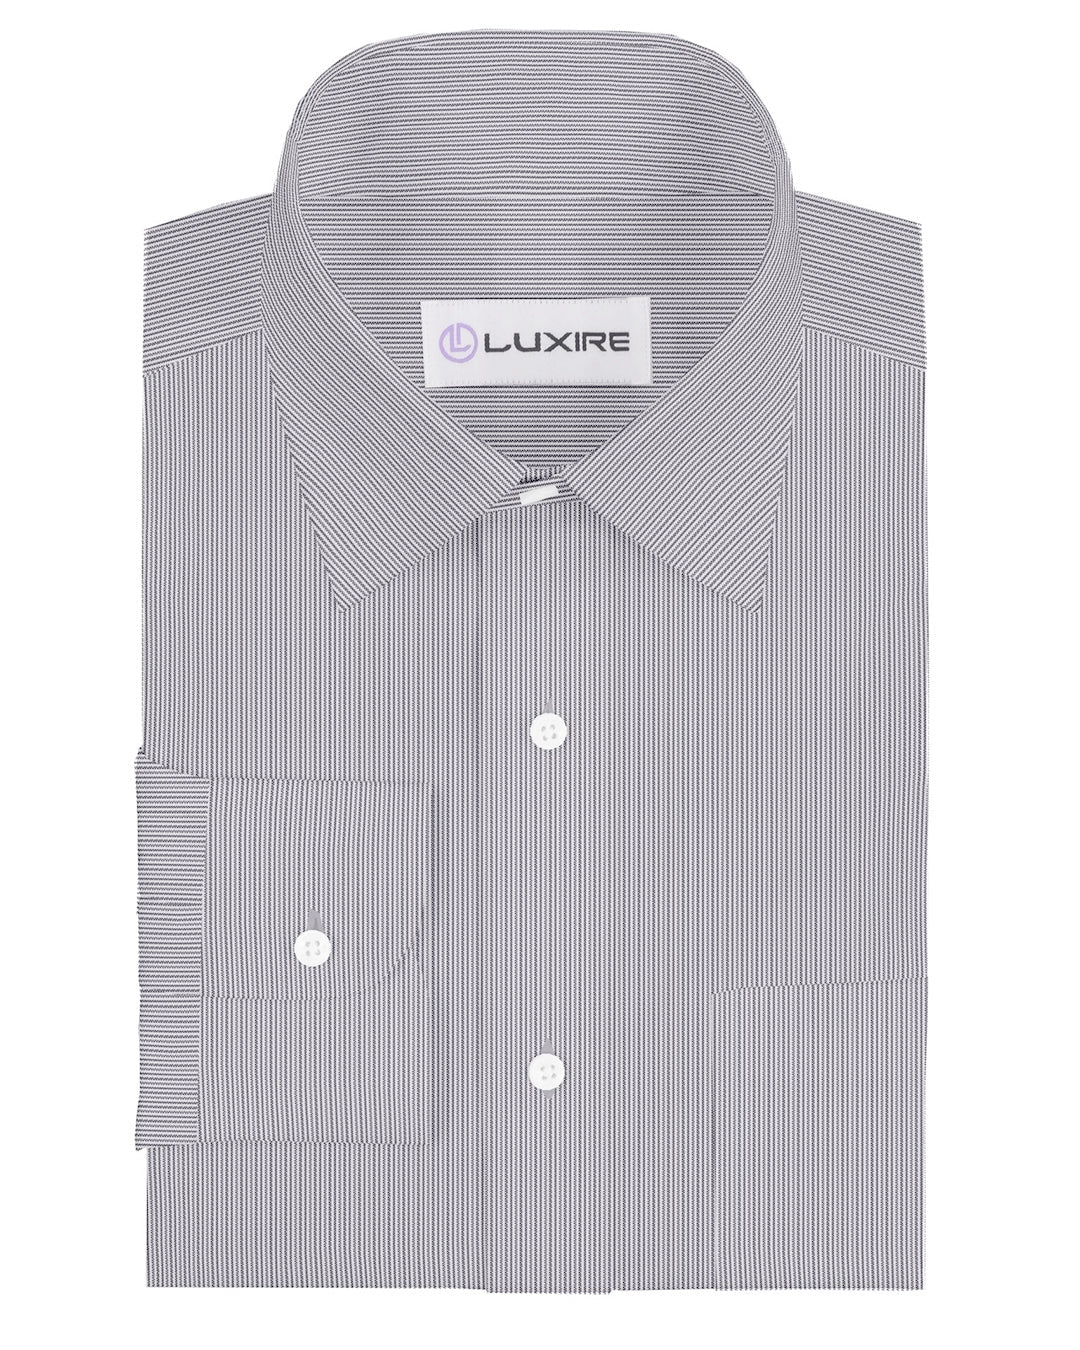 Front of the custom linen shirt for men in black and white dress stripes by Luxire Clothing